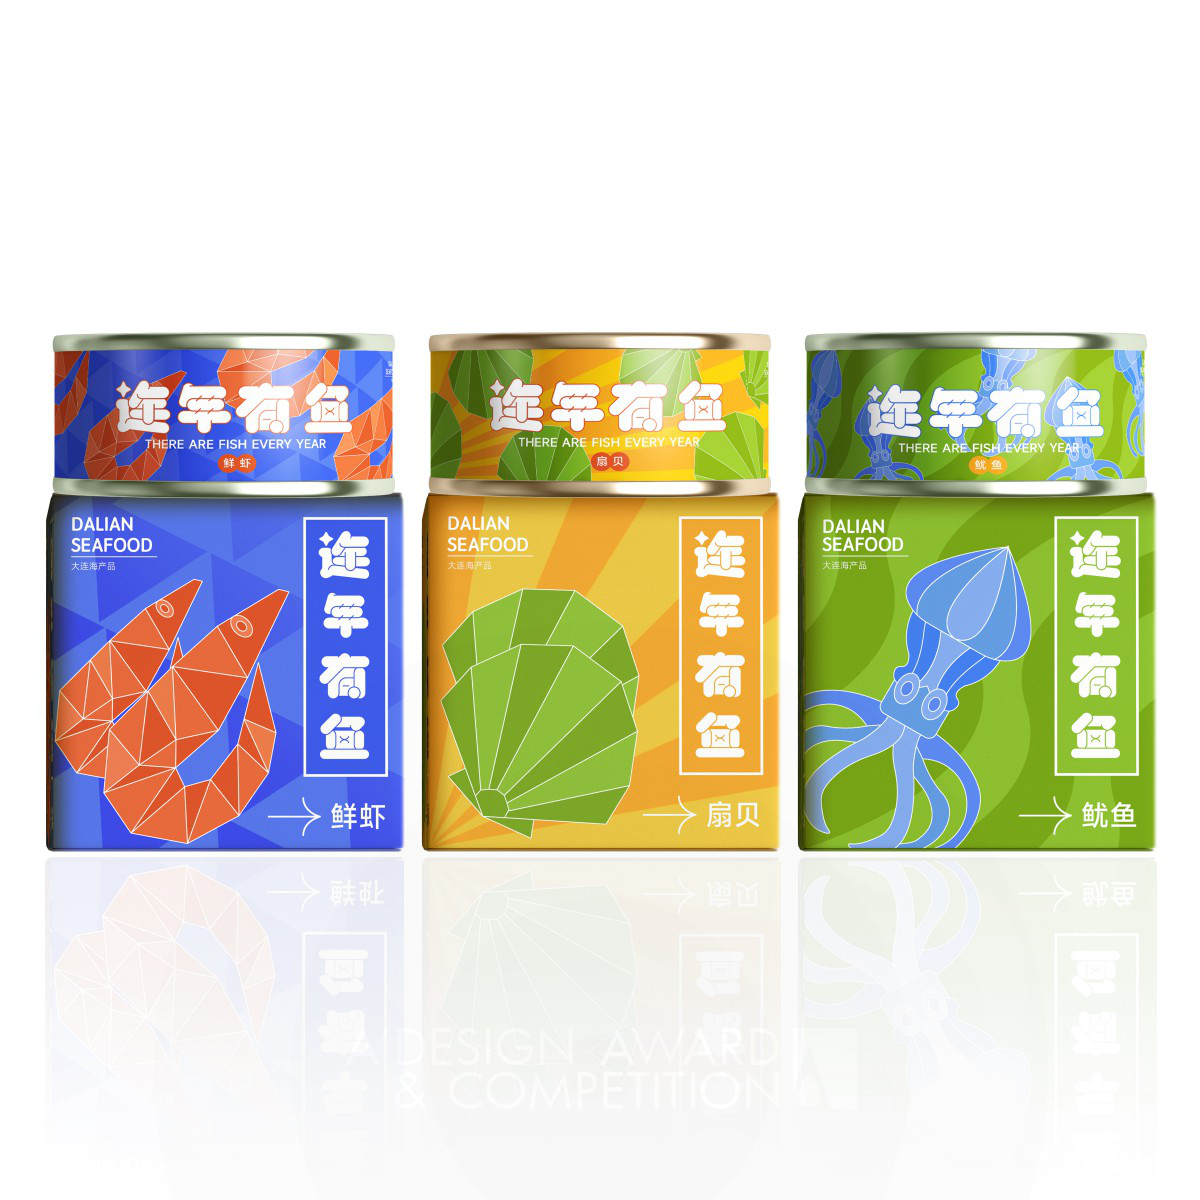 Dalian Seafood: A Creative and Modern Packaging Design